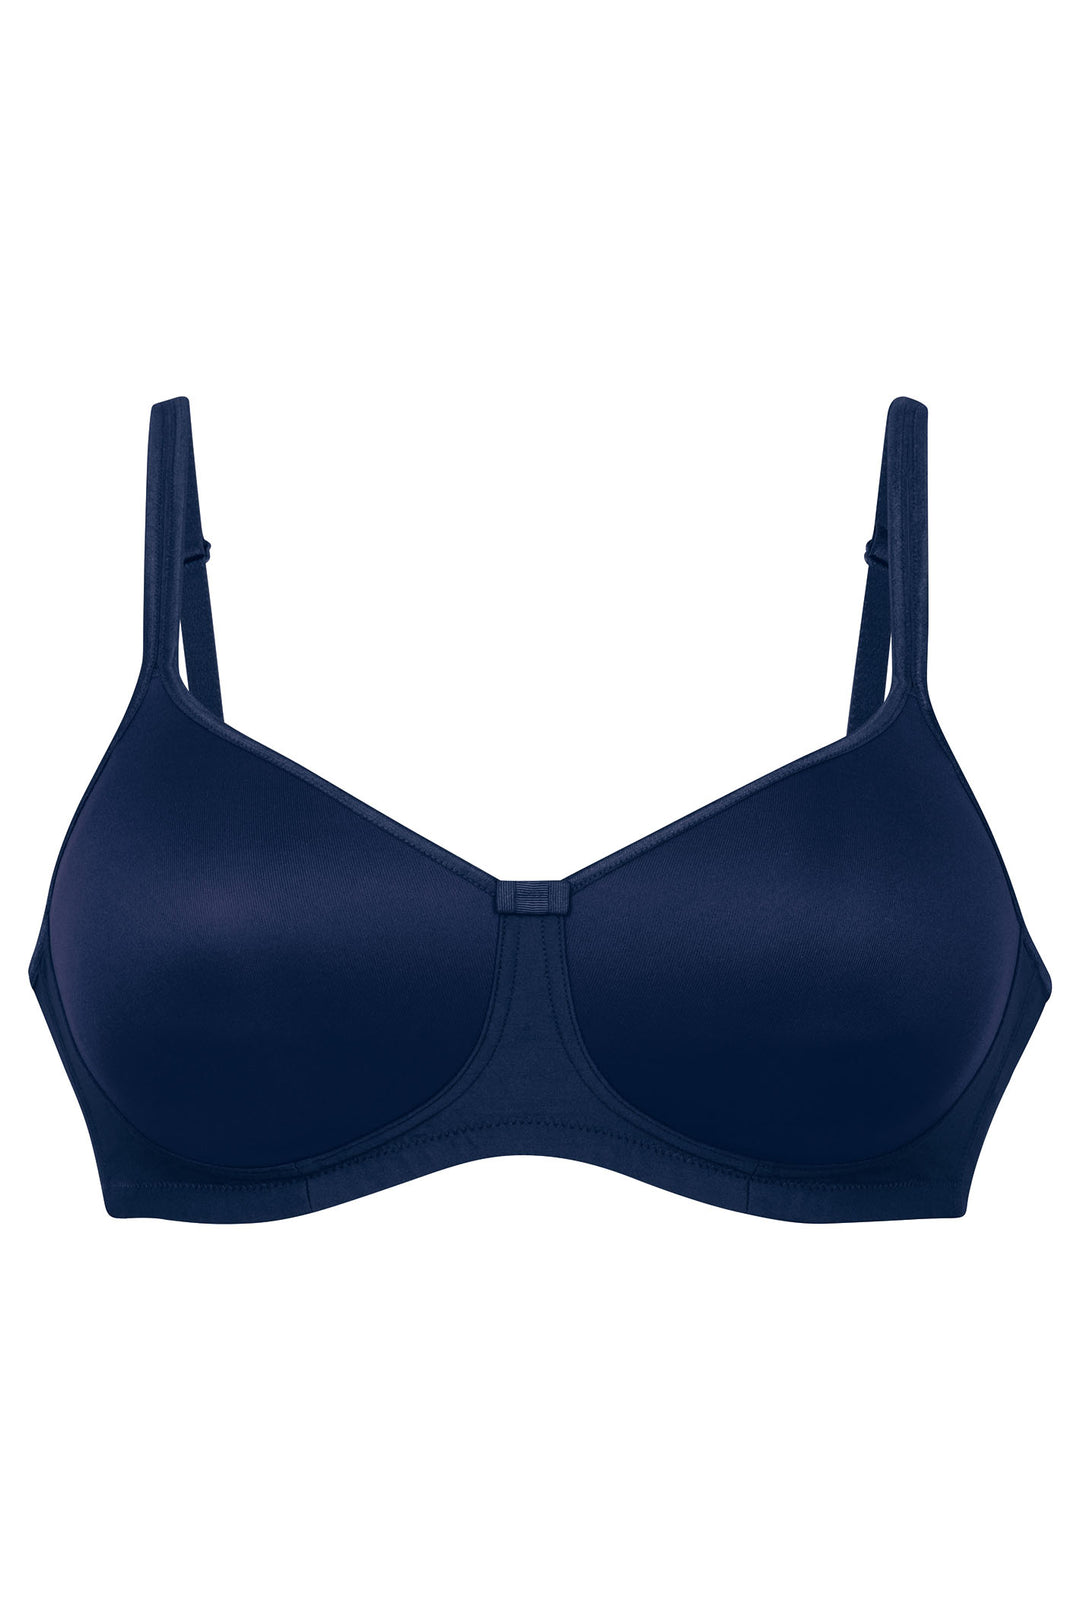 Mastectomy Bra The Rose Contour Size 46D Navy Blue at